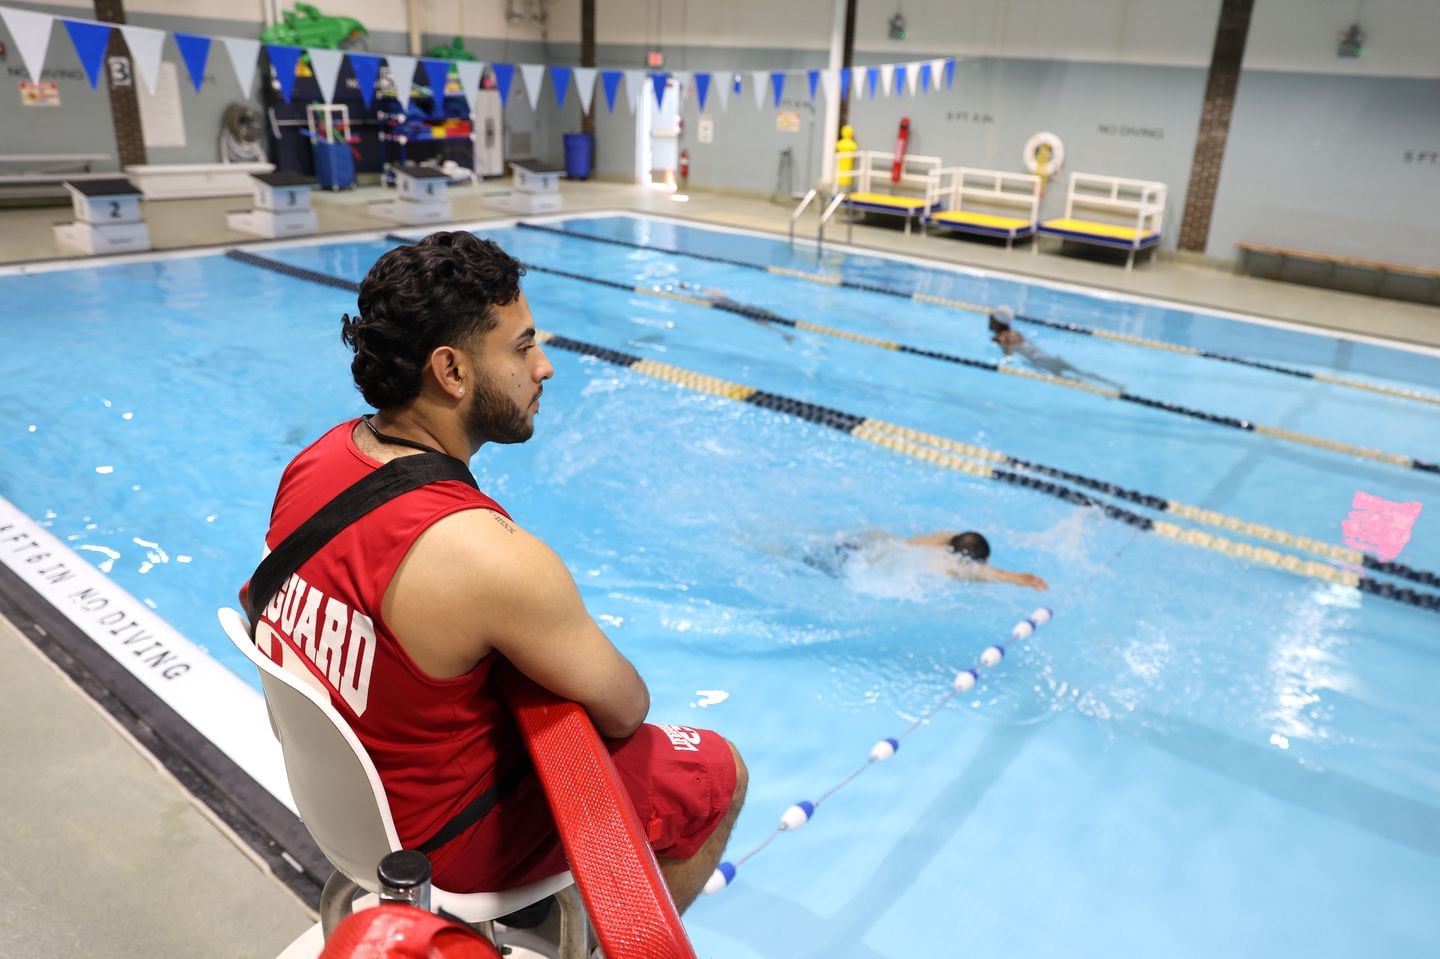 Cristian Parra, a lifeguard at Boston's Mason Pool, watched over swimmers as they swam laps.